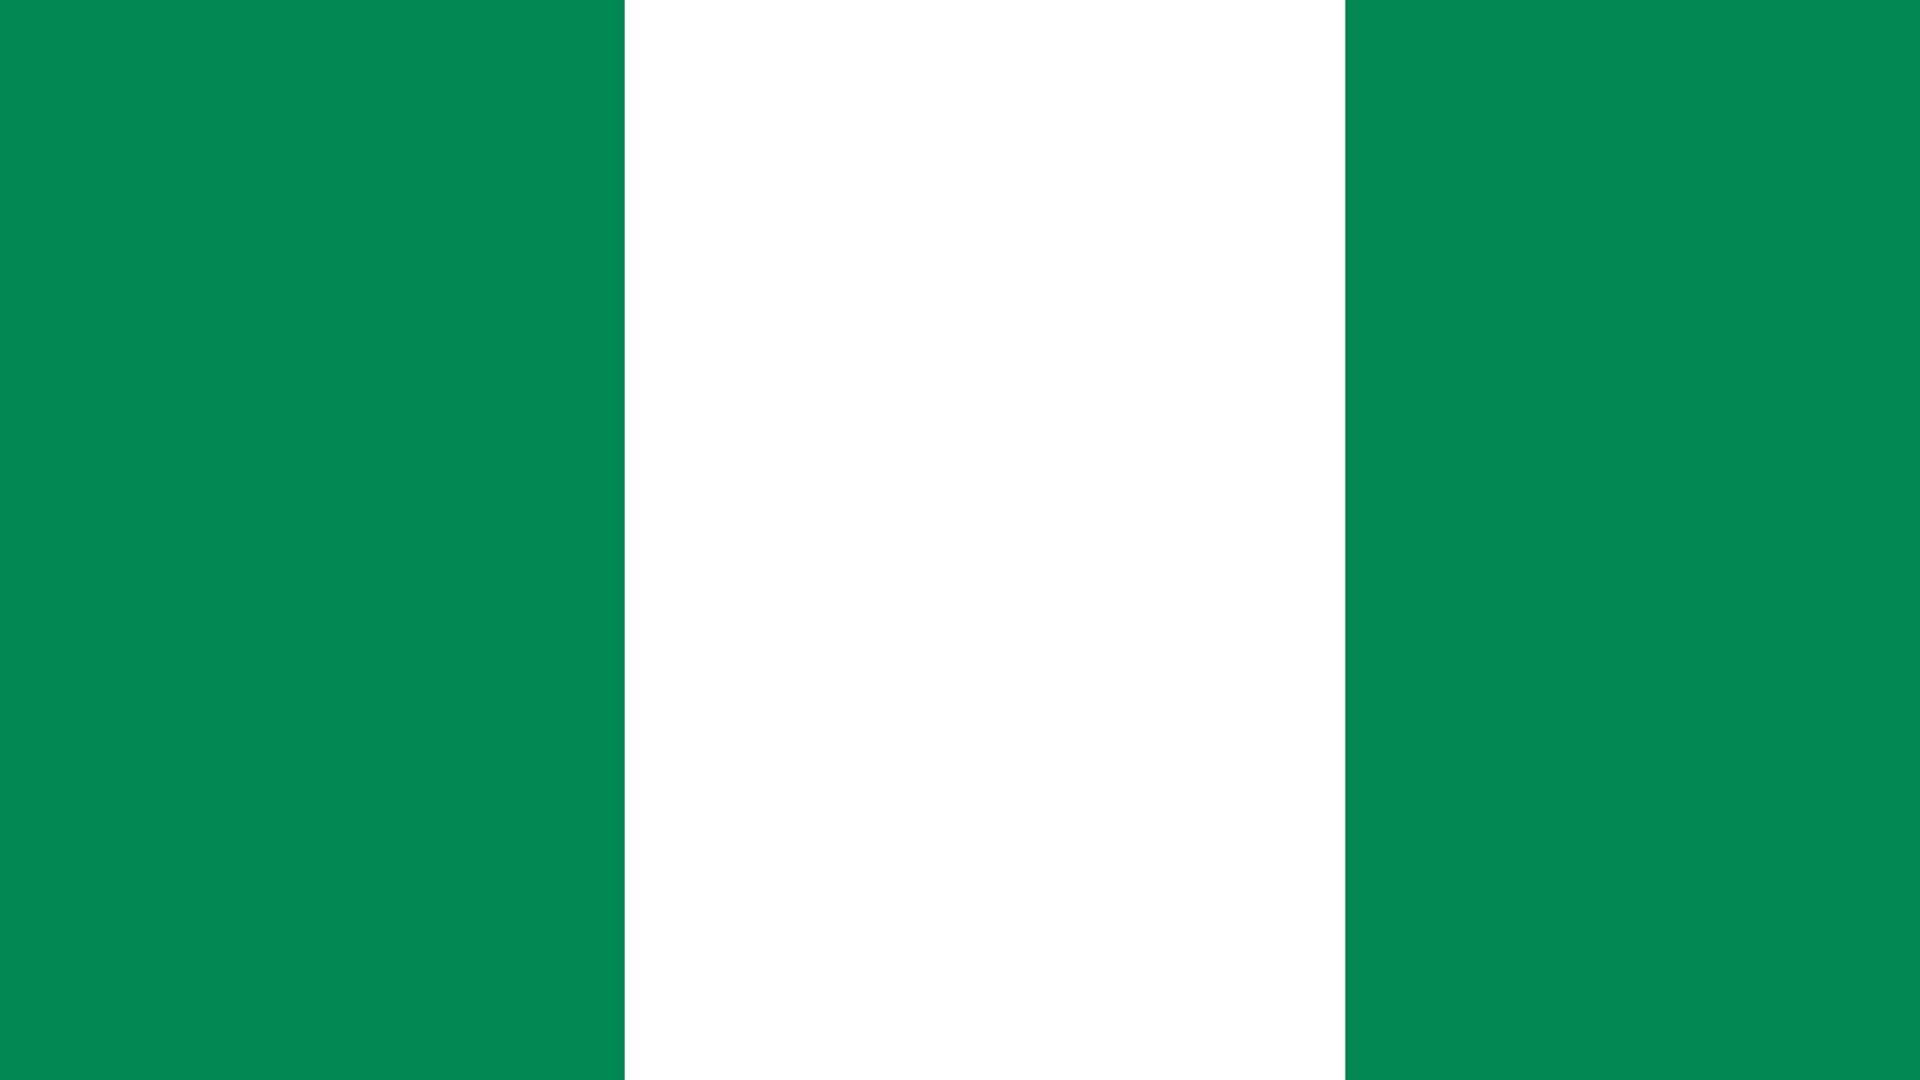 An image of the flag of Nigeria